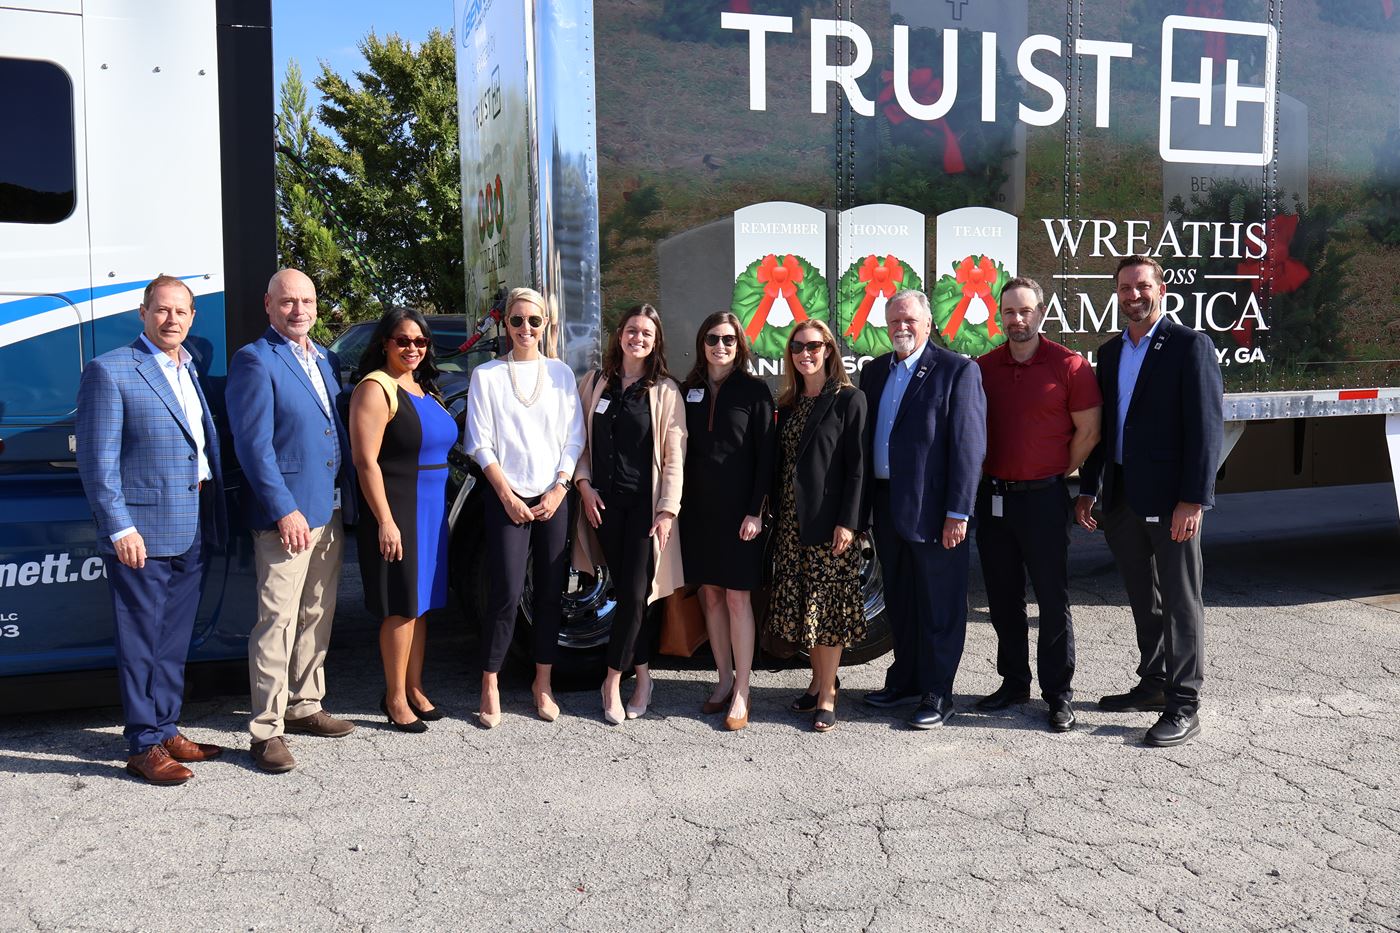 Members of Bennett and Truist Stand in Front of Cobranded WAA Trailer